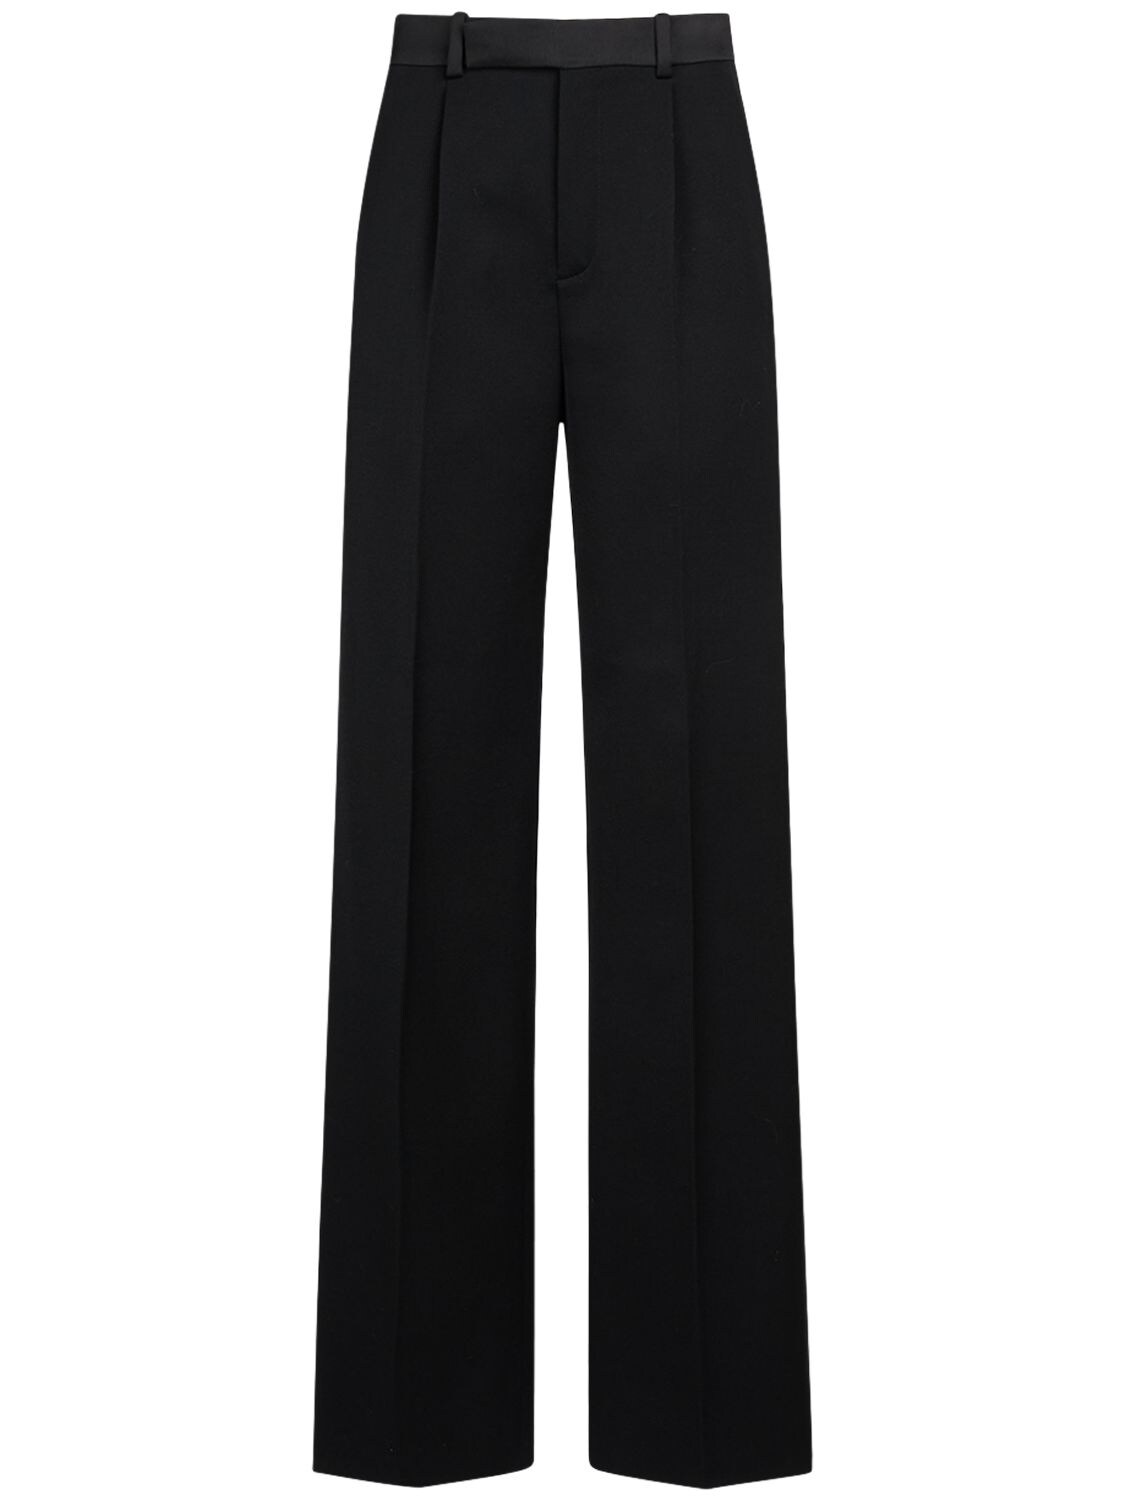 Image of Tailored Wool Pants